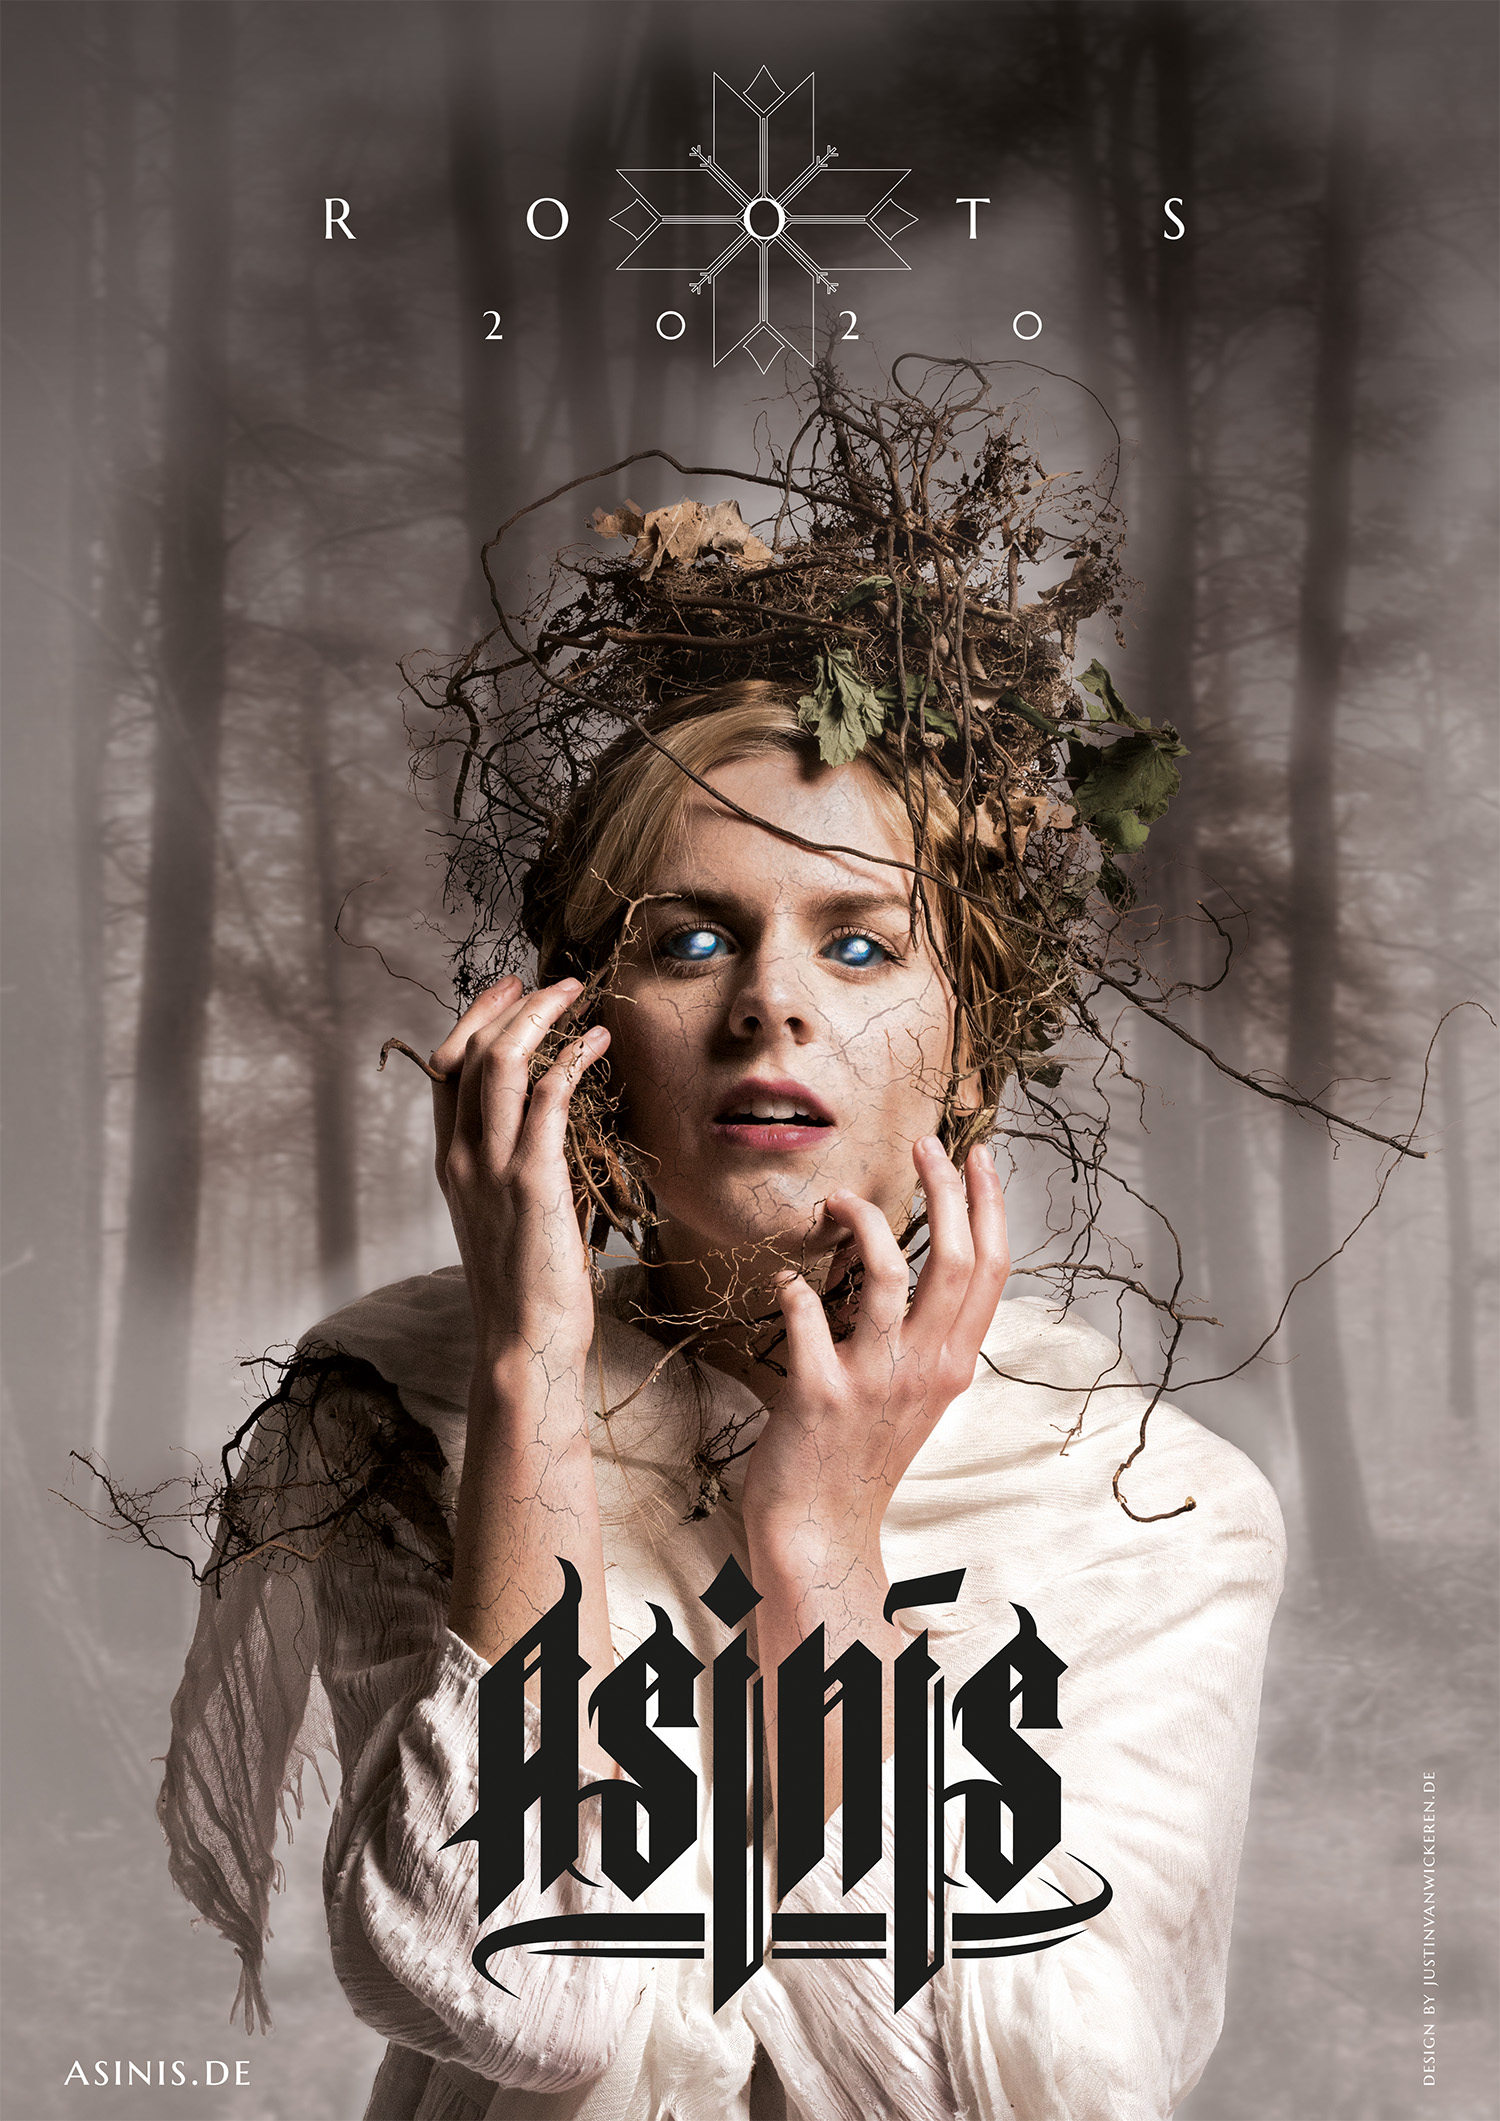 ASINIS_PLAKATE_Roots EP_2019.indd